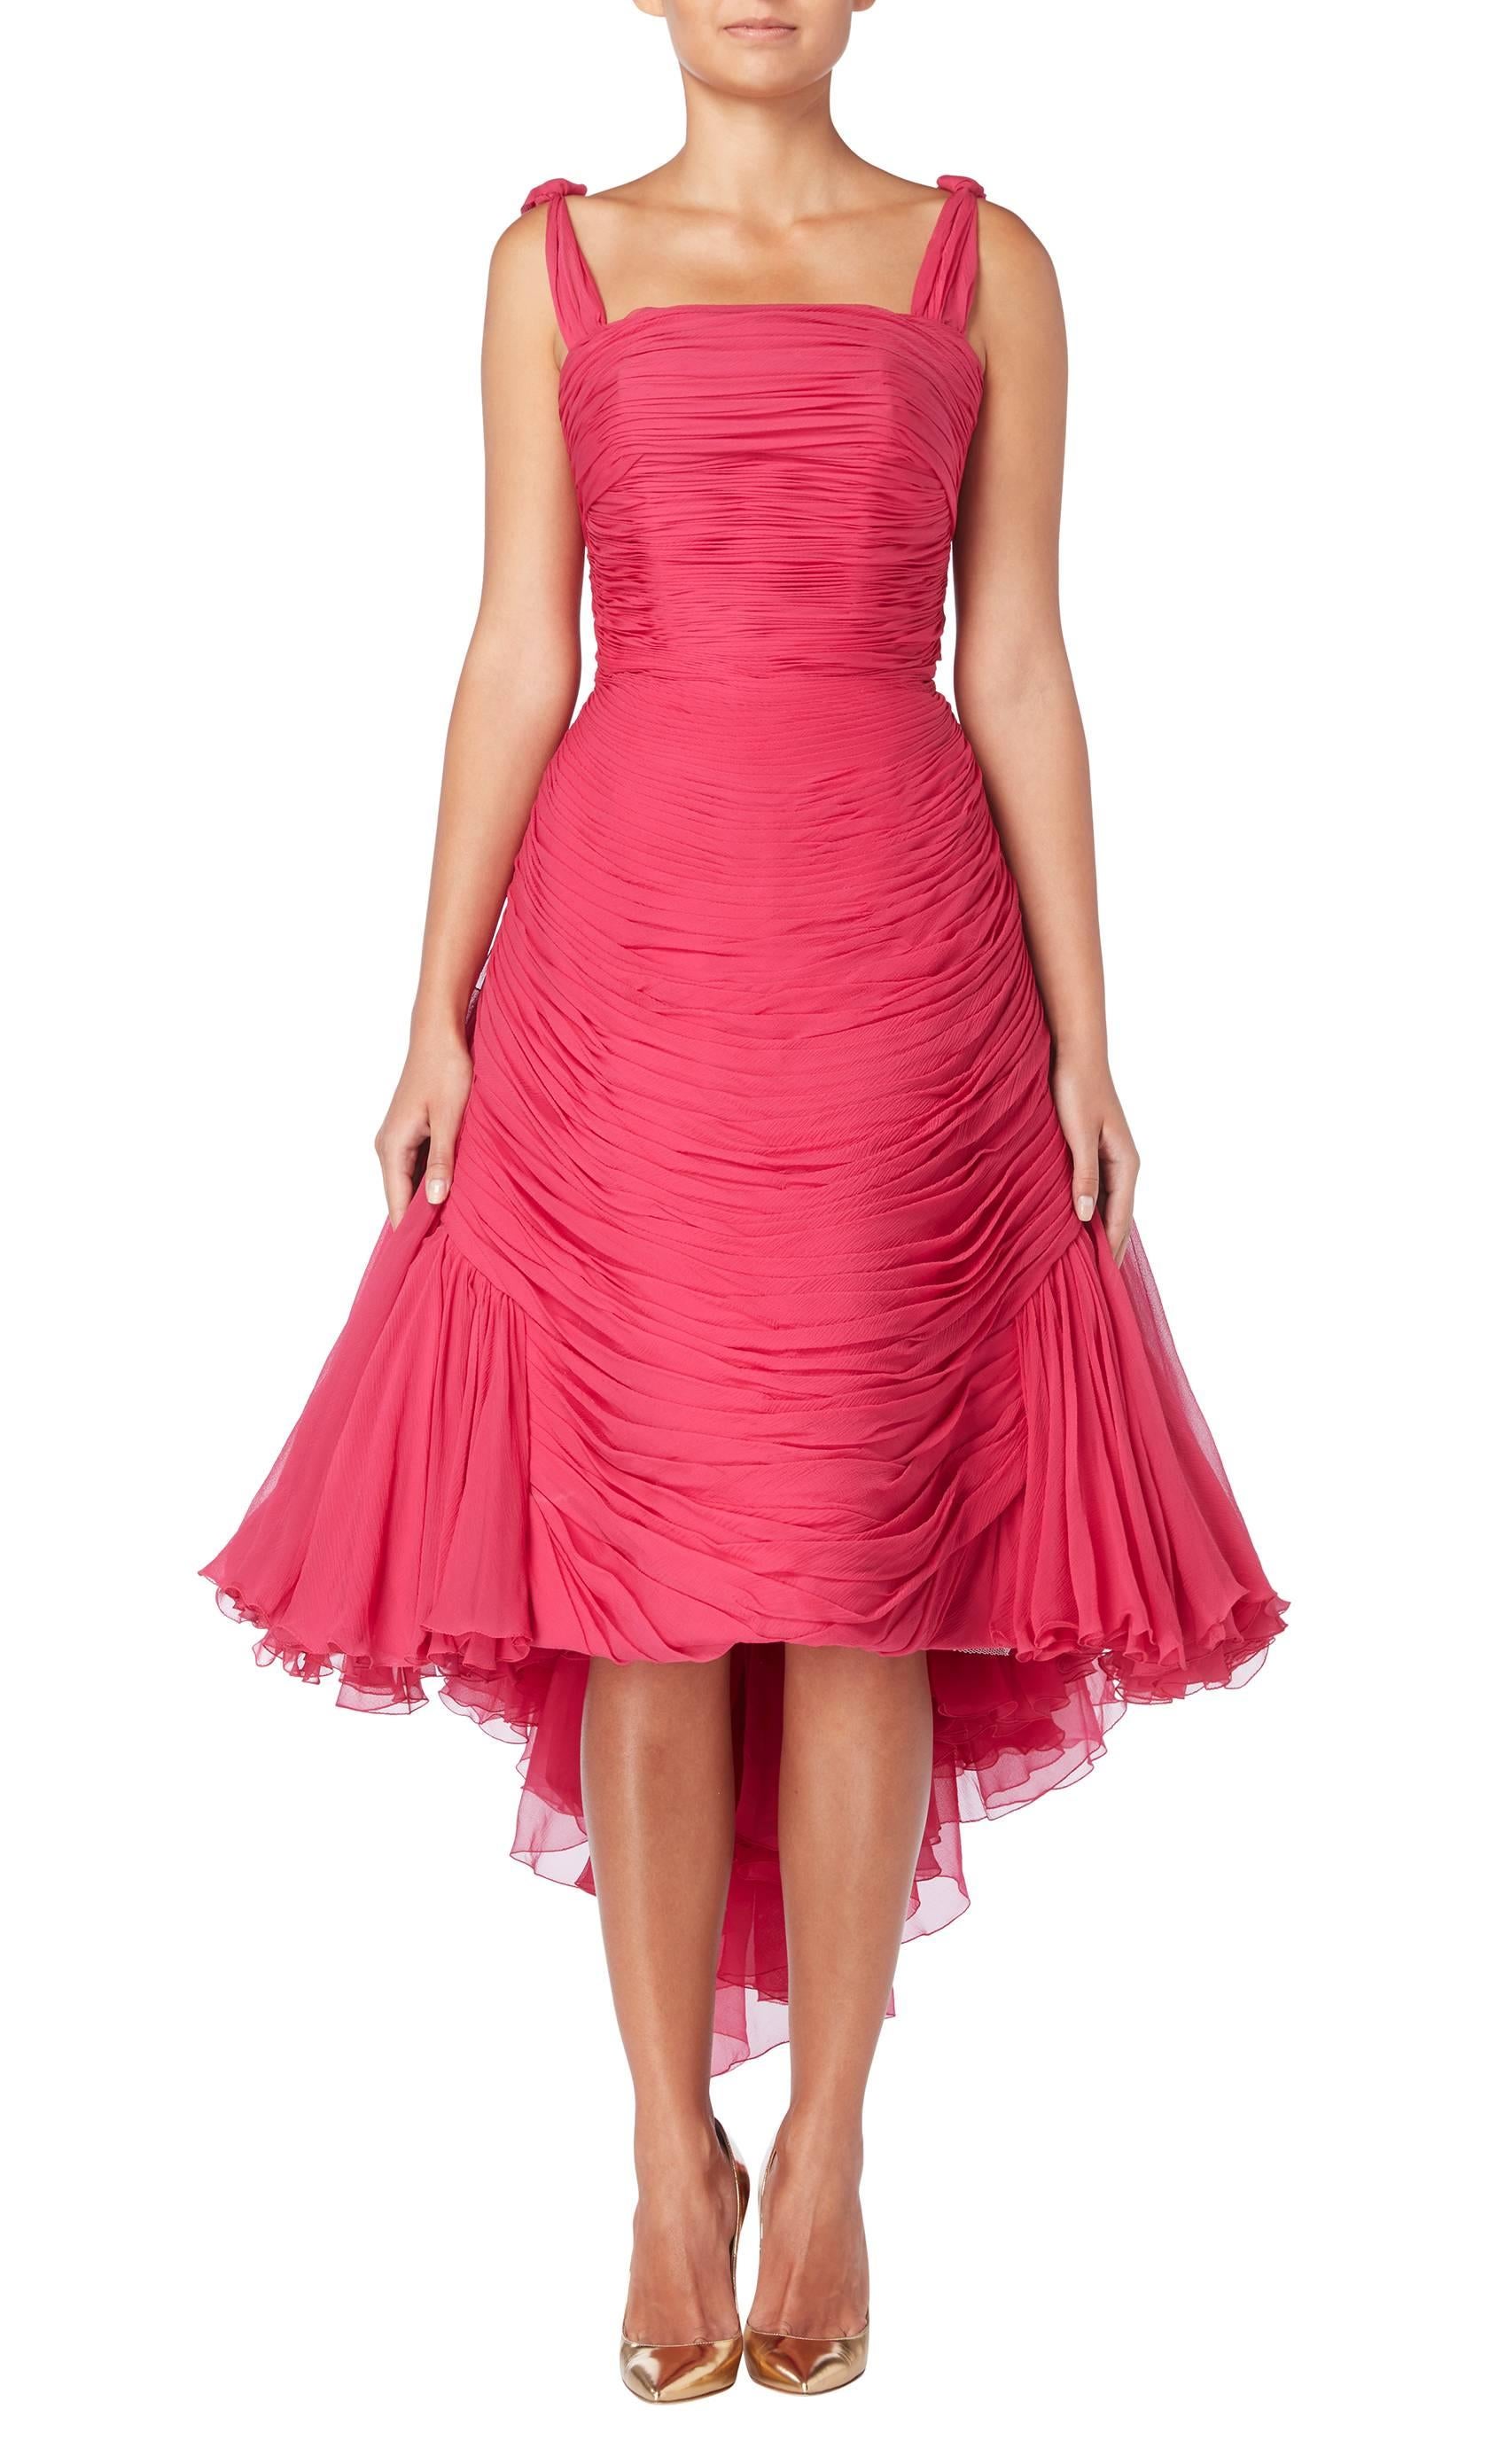 A simply stunning piece of haute couture, this Jean Dessès cocktail dress is truly timeless. Constructed in a vivid shade of fuchsia pink chiffon, the front of the dress is horizontally pleated from the bust to the hem, while an internal boned